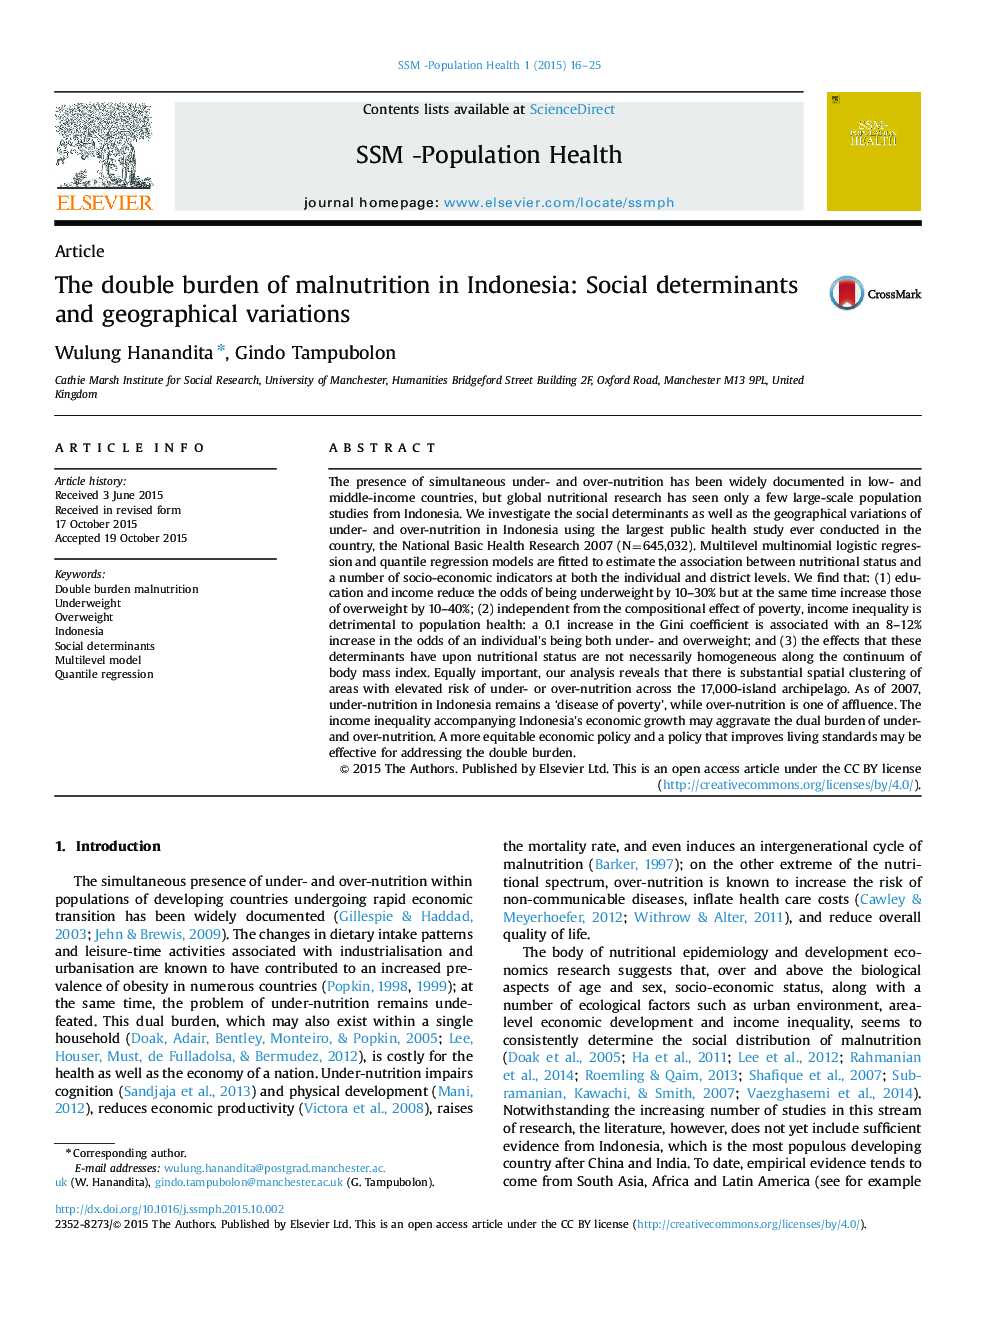 The double burden of malnutrition in Indonesia: Social determinants and geographical variations